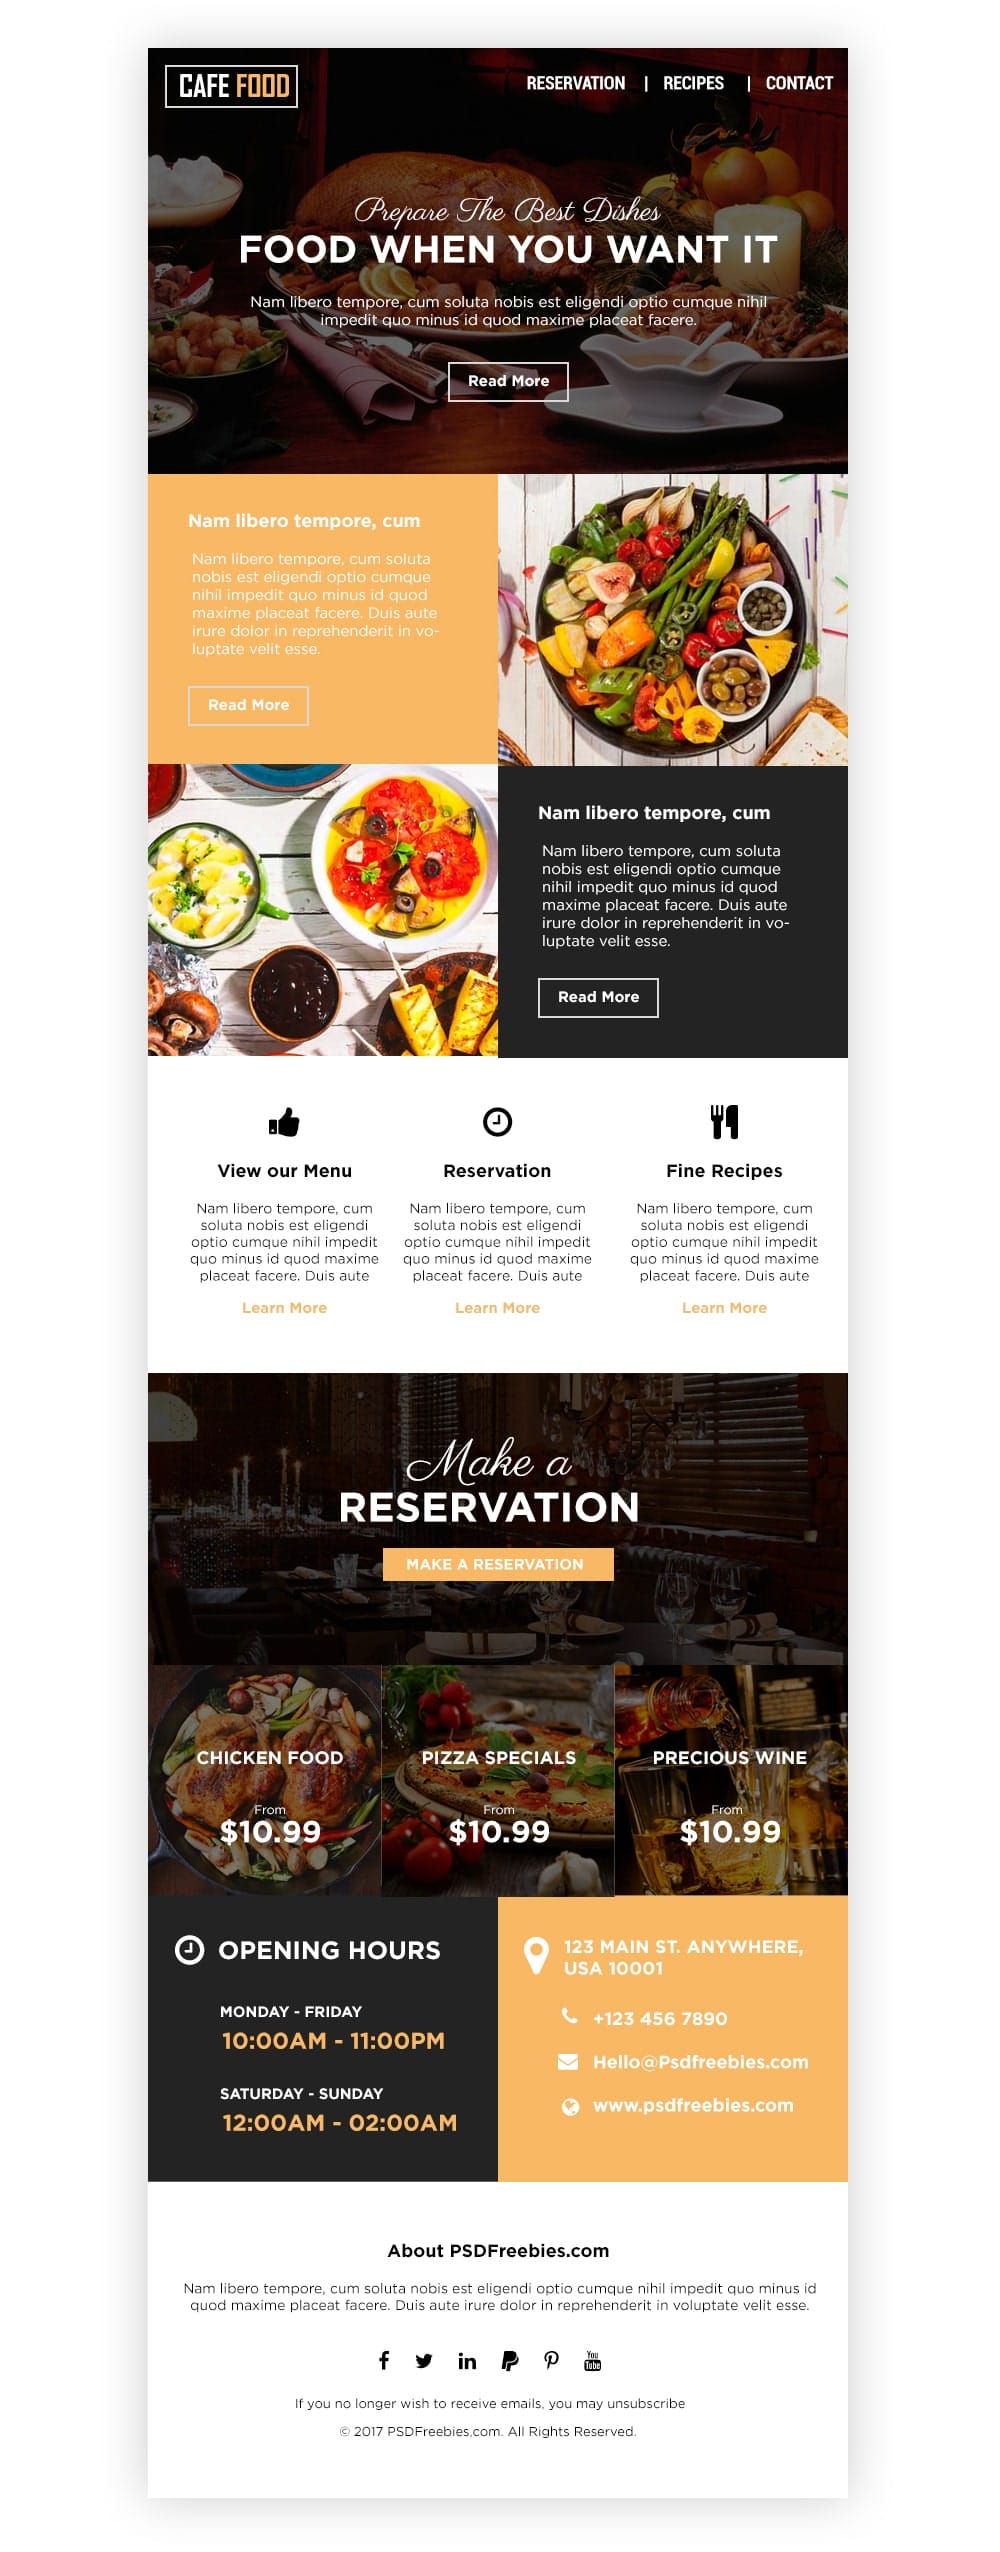 Food and Restaurant E-newsletters Template PSD